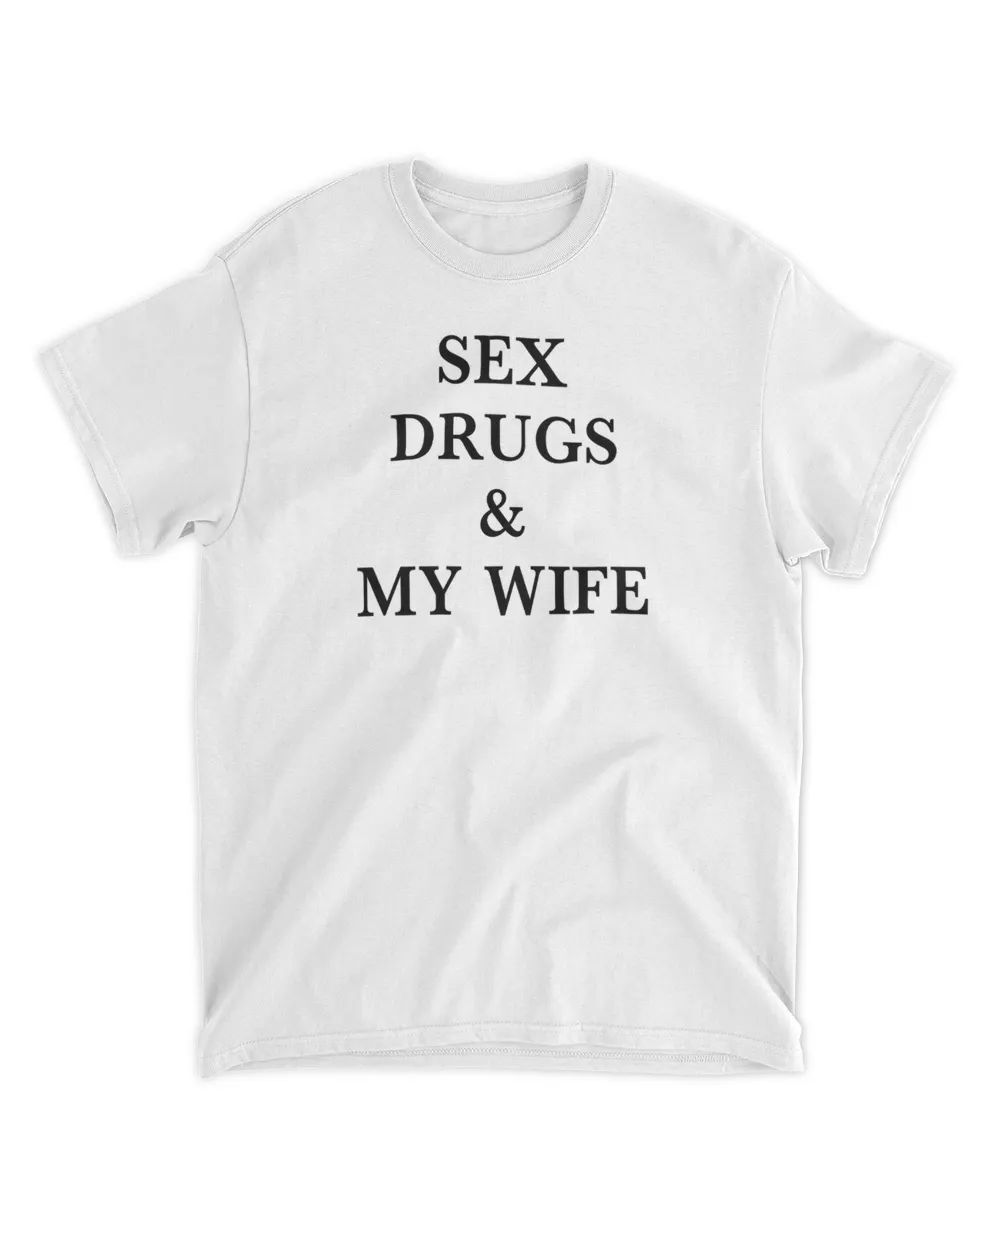 Sex Drugs and My Wife Shirts image